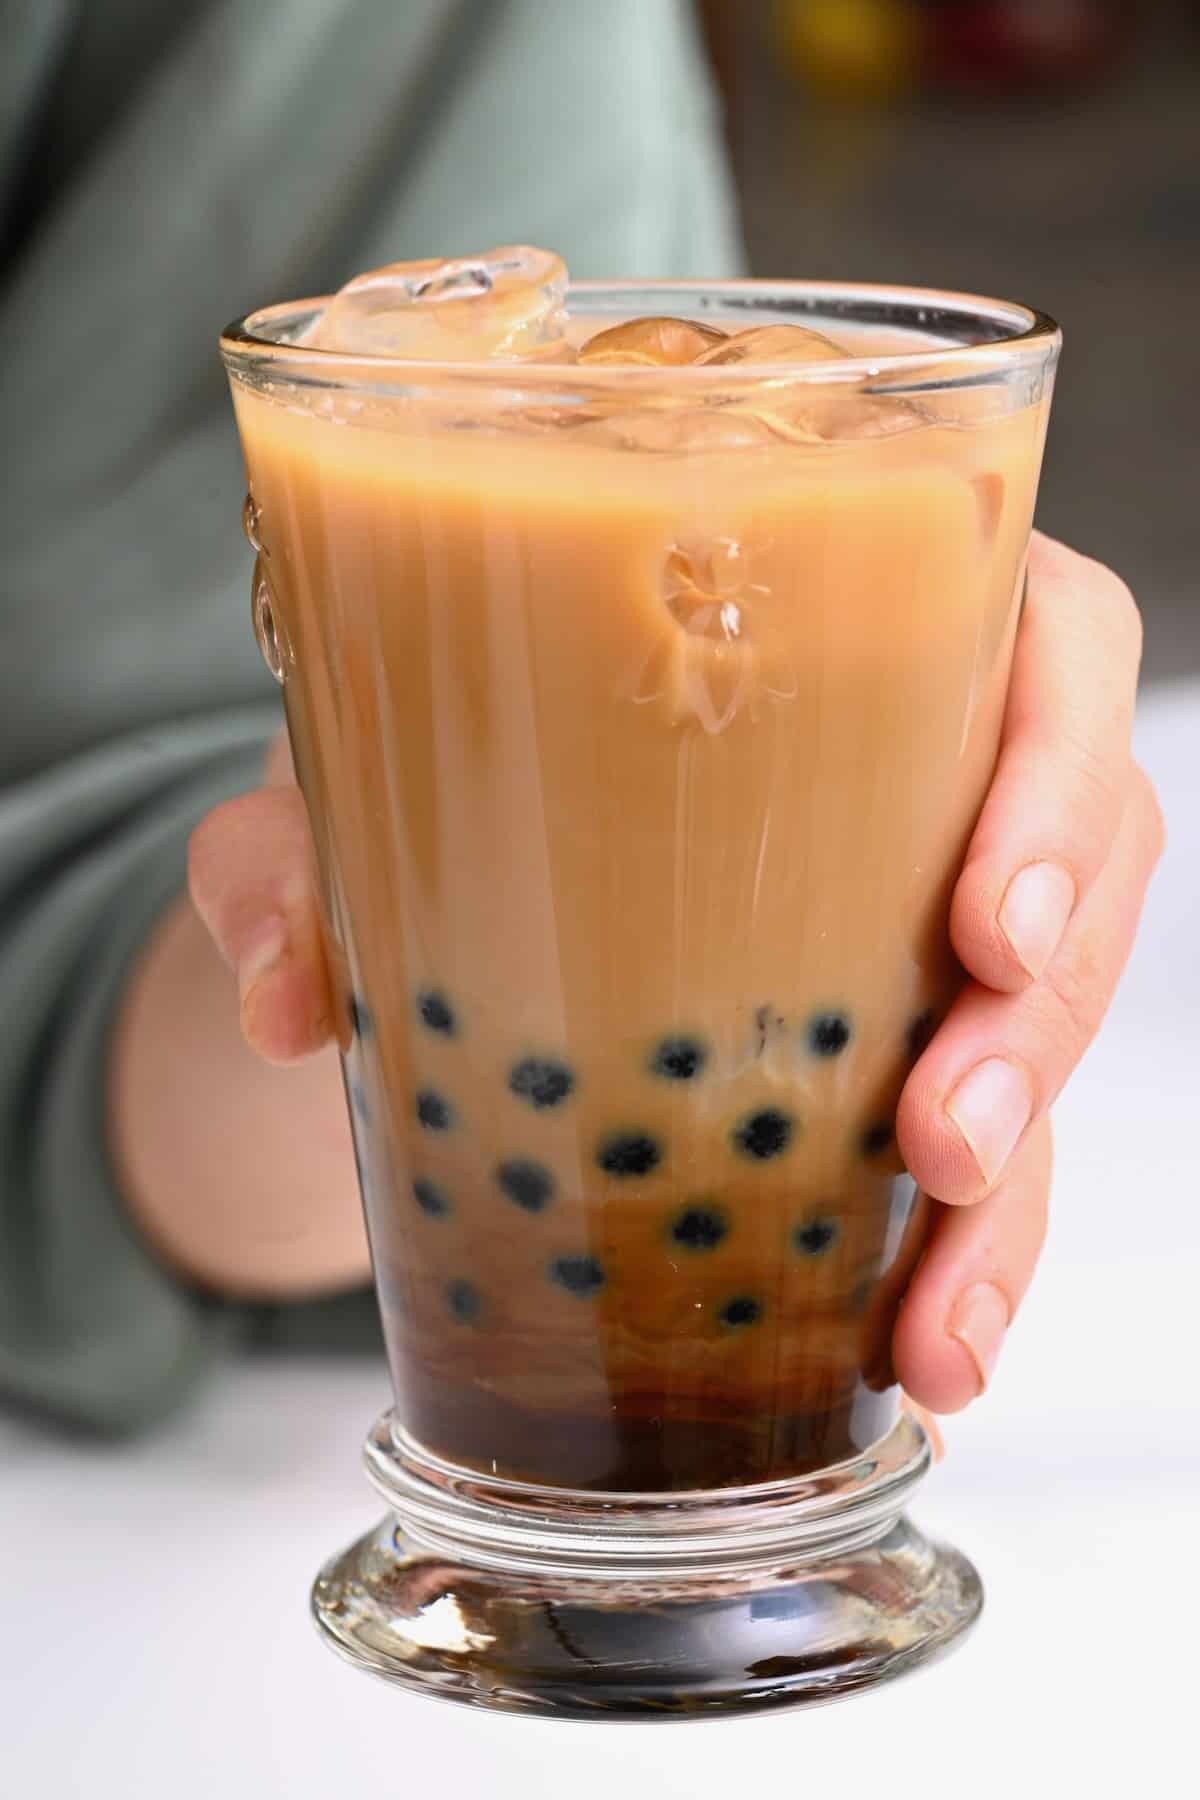 A hand holding a glass with bubble milk tea